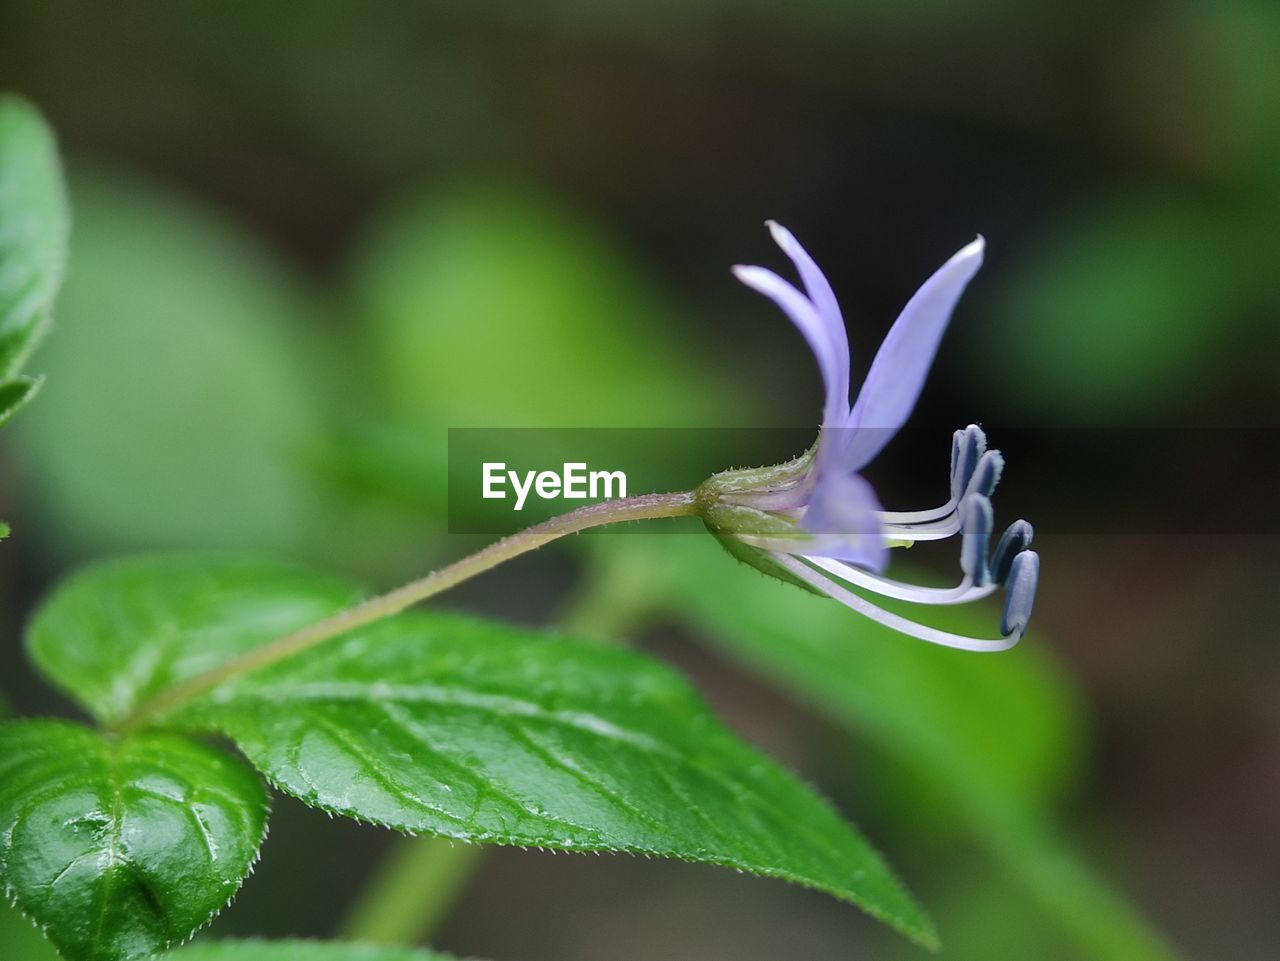 CLOSE-UP OF PURPLE FLOWER ON PLANT